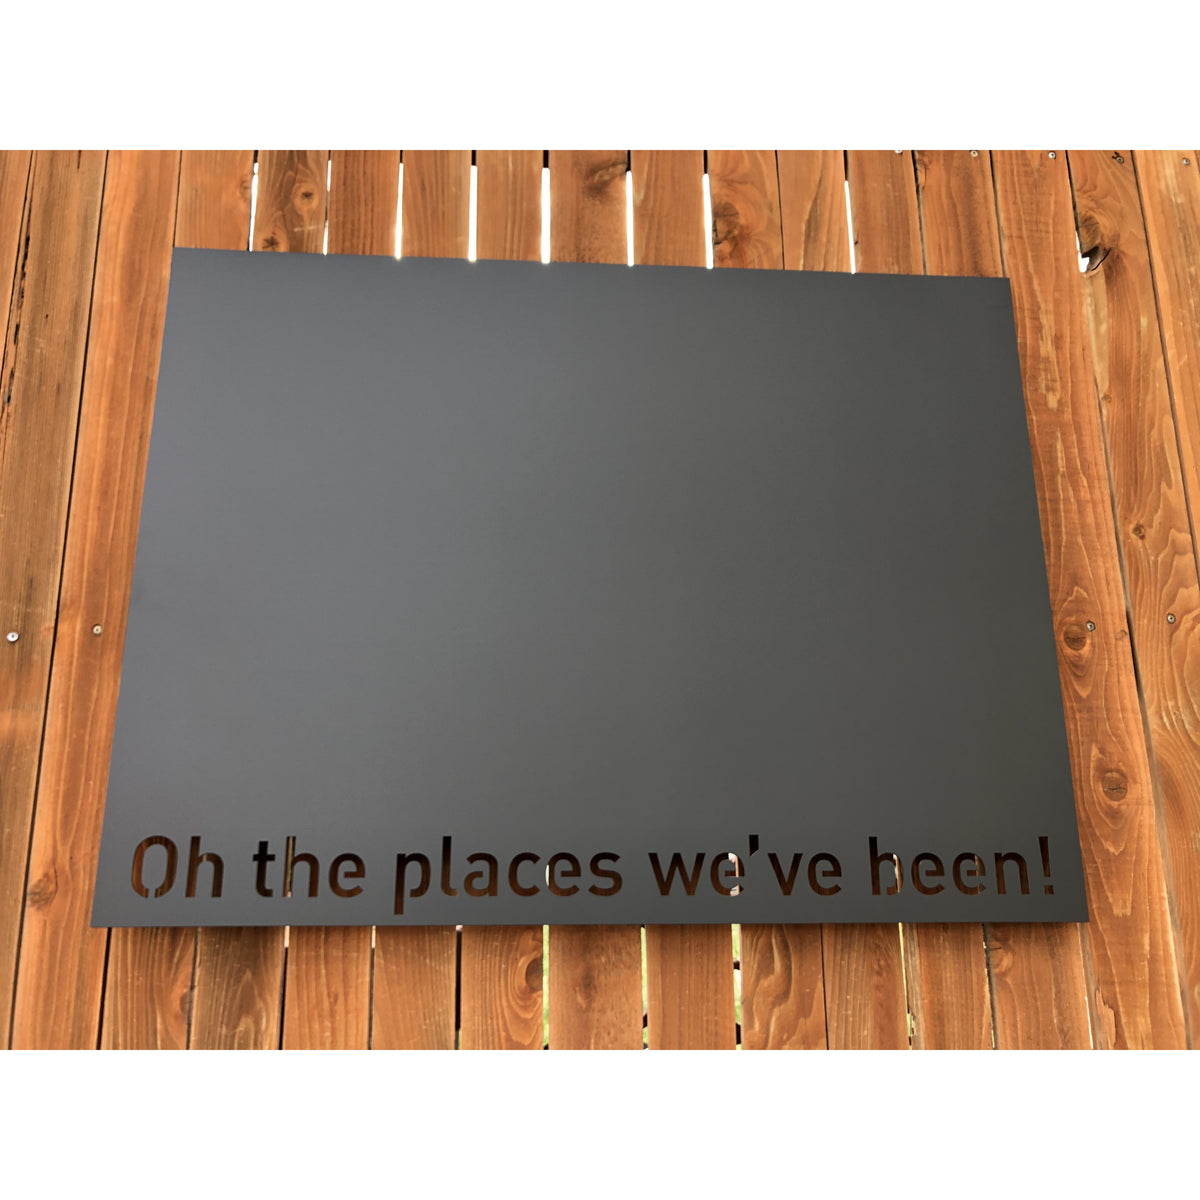 Oh the places we've been! Magnet Display Board | #1206